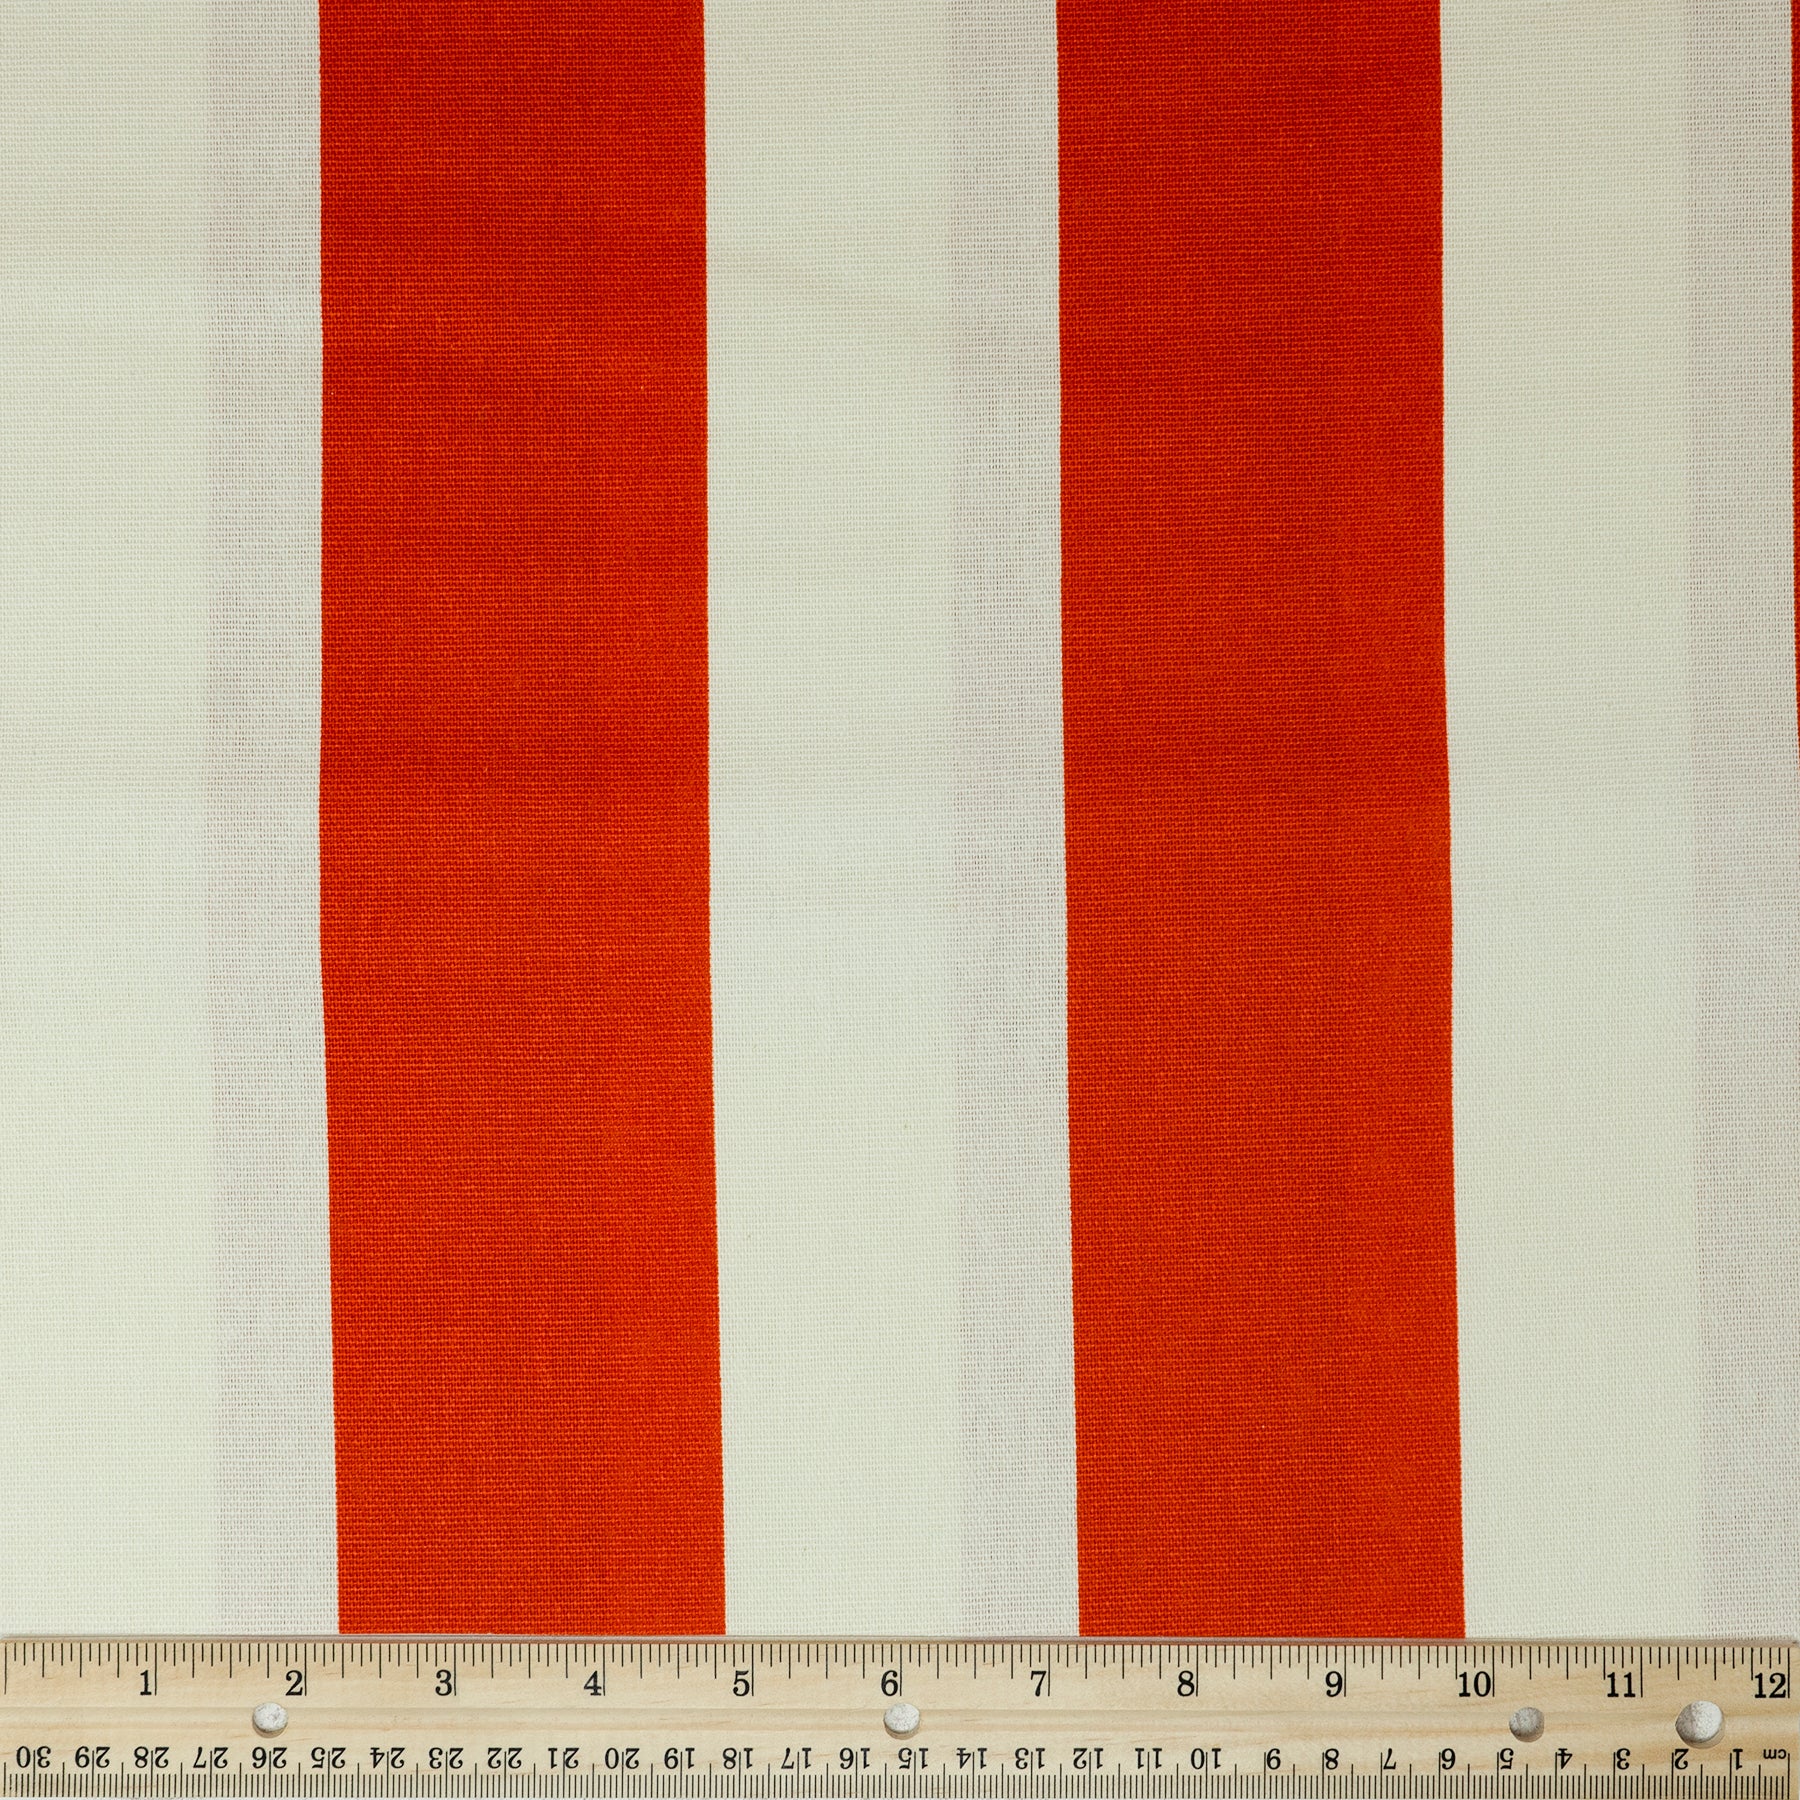 Waverly Inspirations 100% Cotton Duck 45" Width Stripe Orange Color Sewing Fabric by the Yard